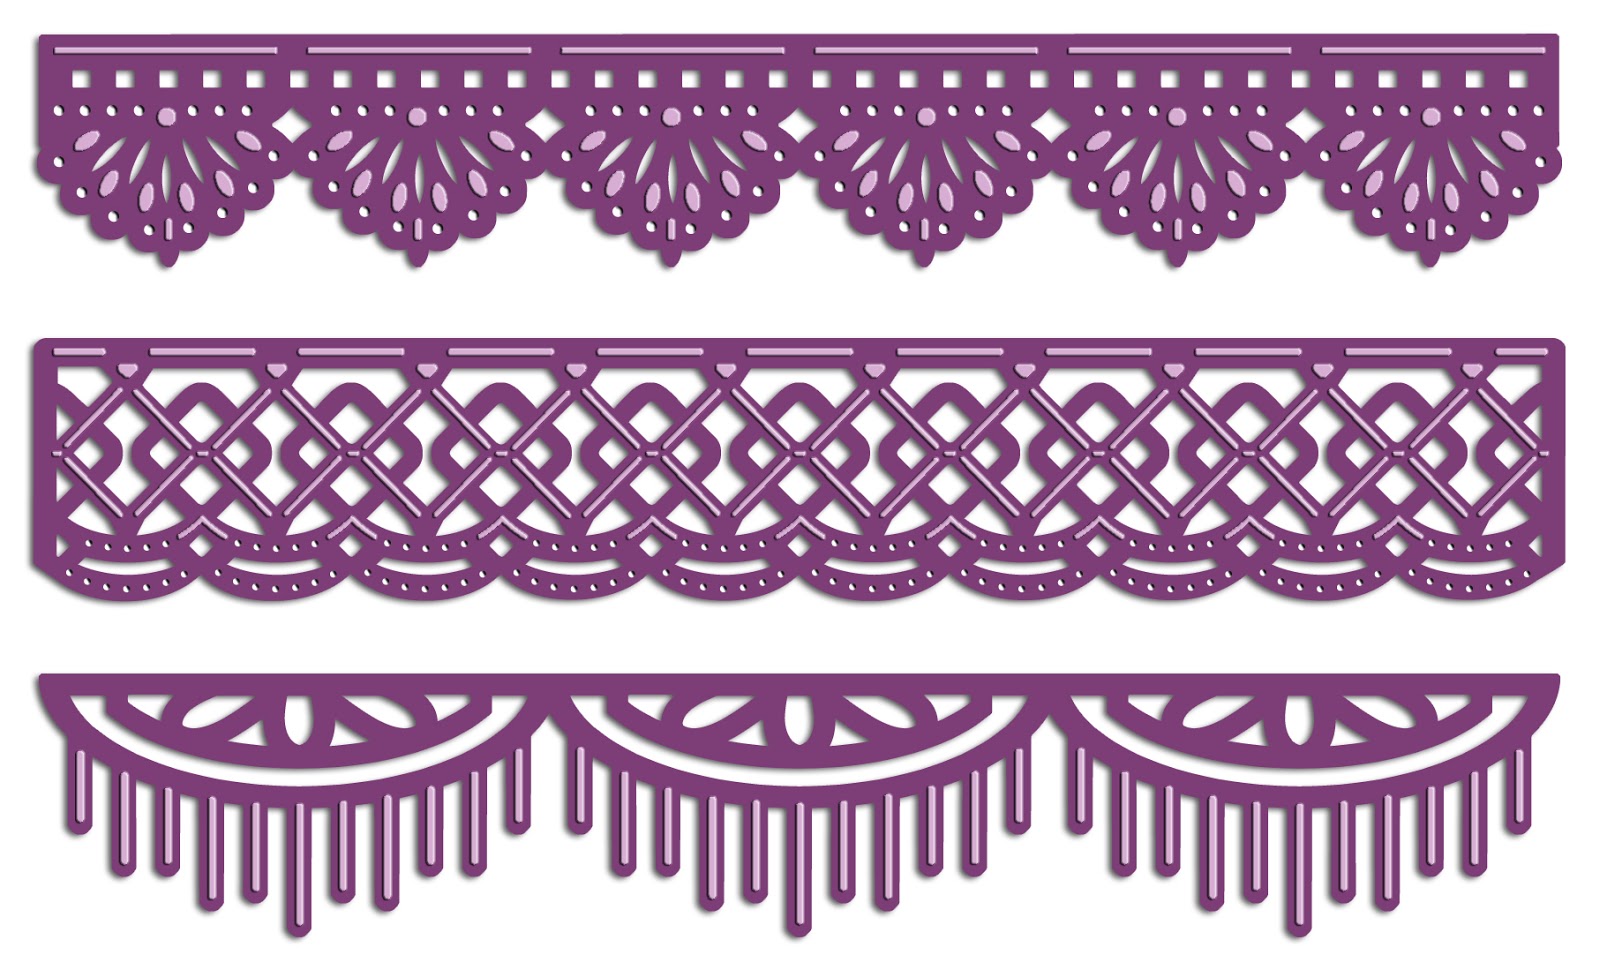 http://www.ourdailybreaddesigns.com/index.php/csbd51-beautiful-borders-dies.html